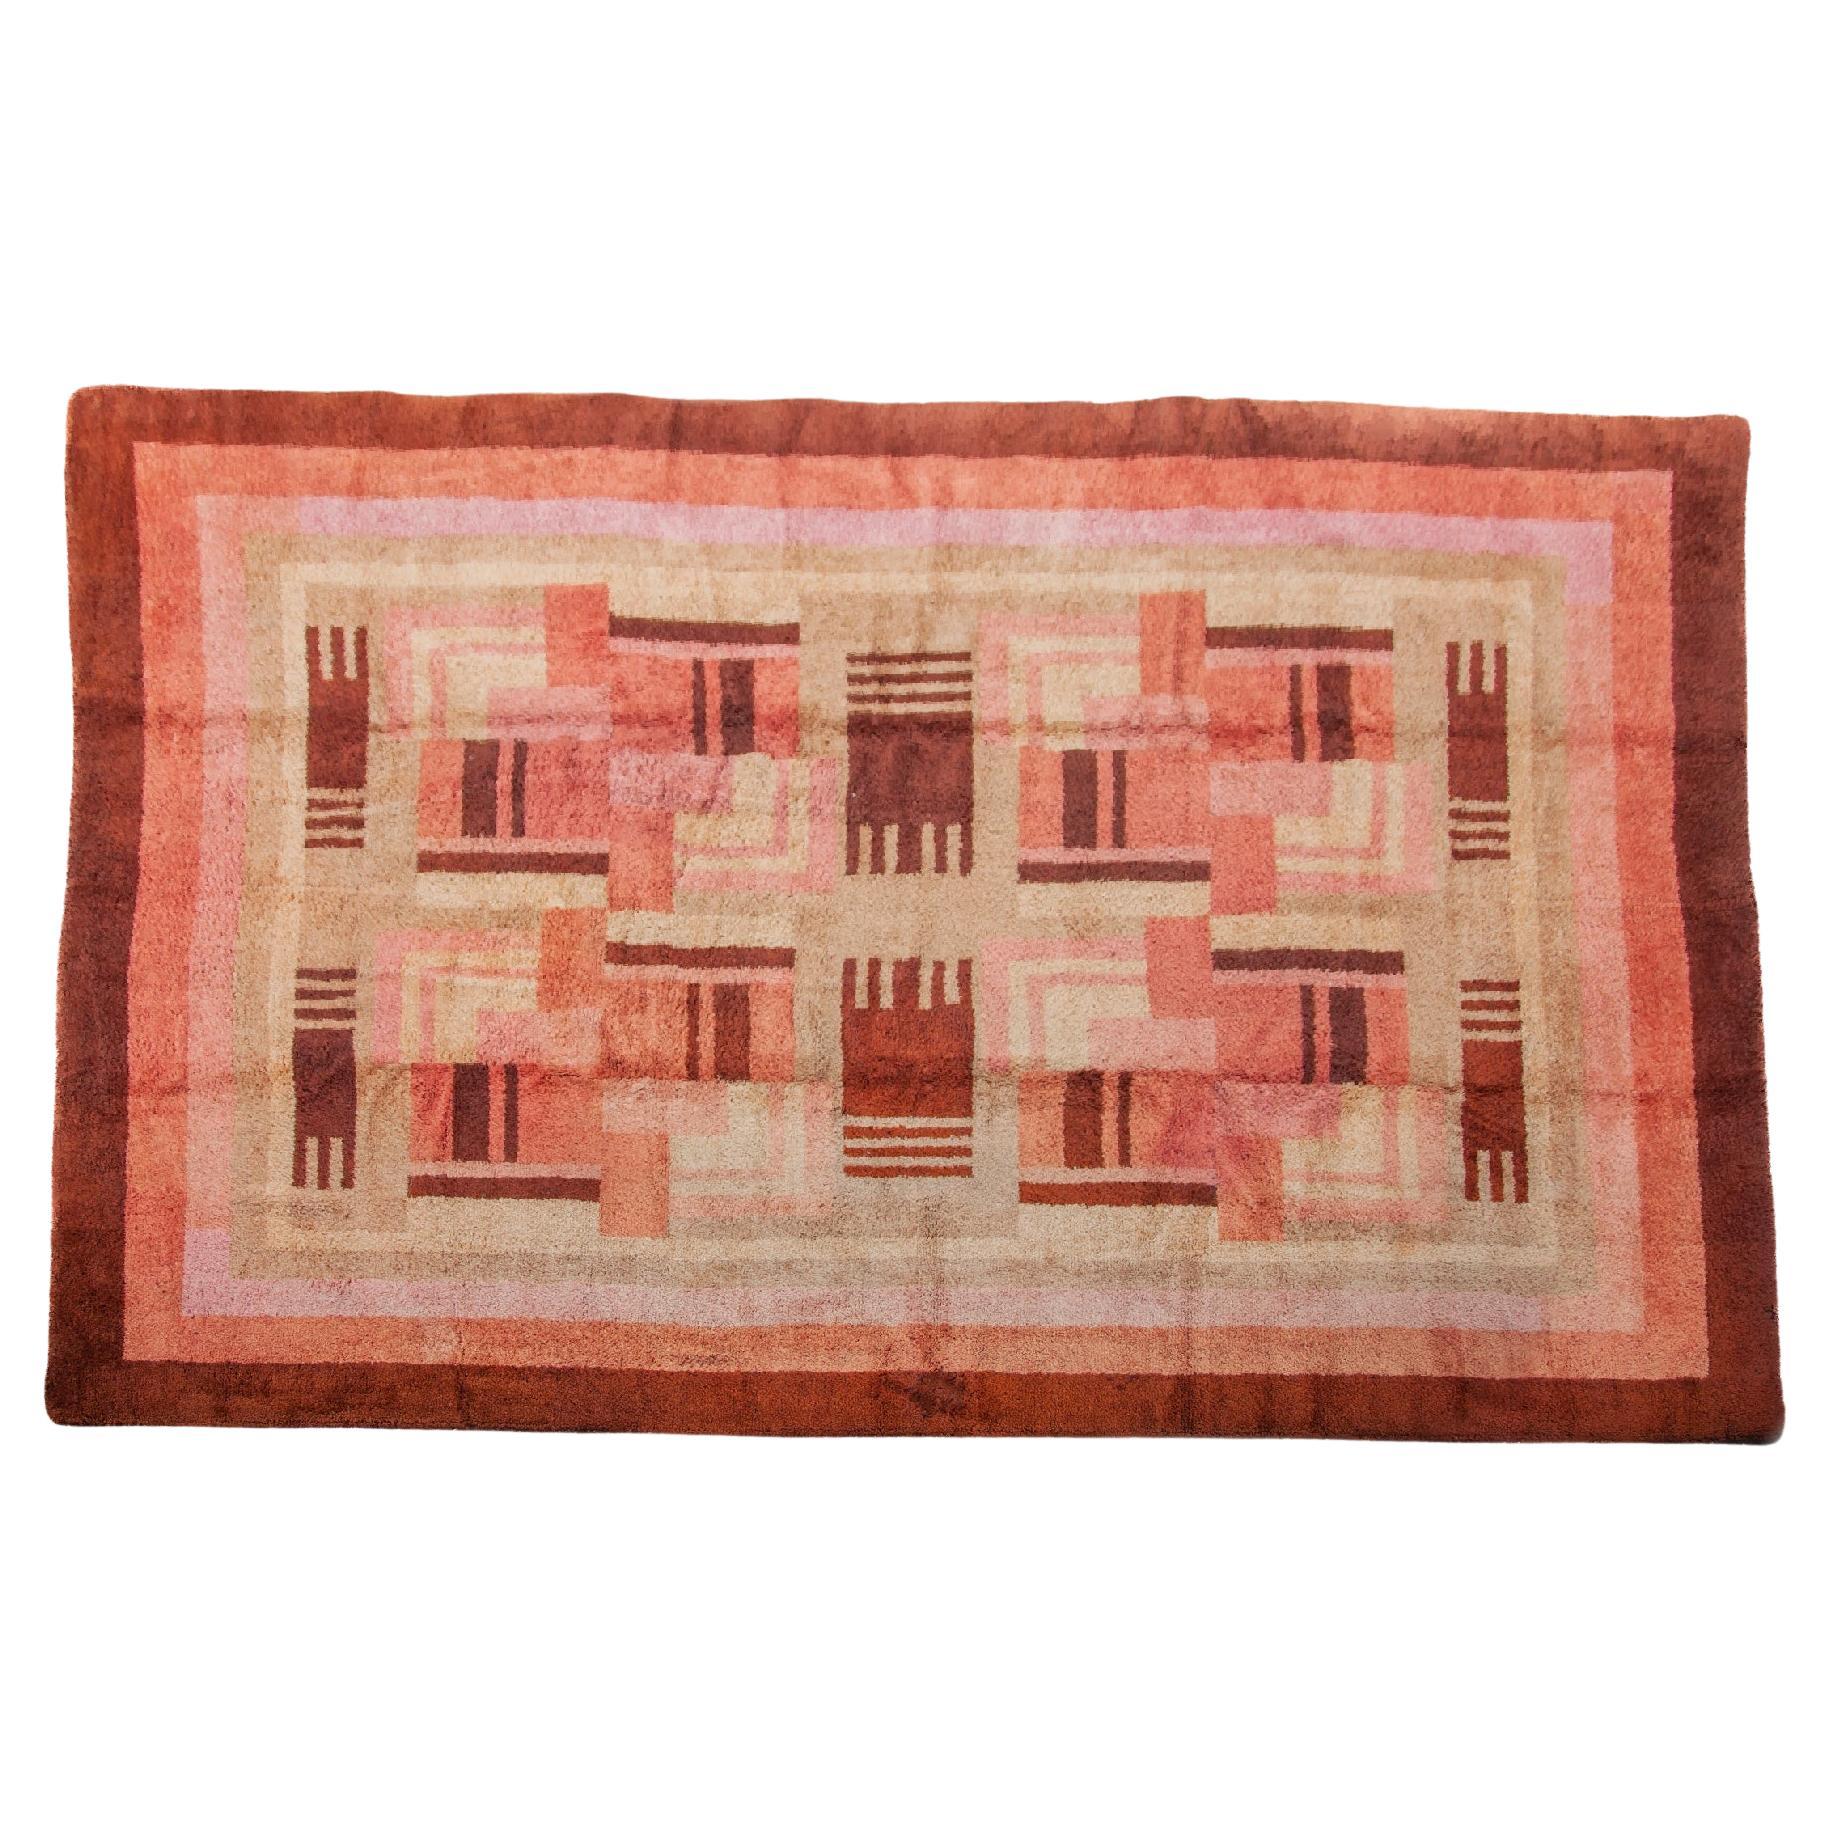 Large four meter French Art Deco futurist hand woven wool rug with abstract art.  Handcrafted in the 1930s this rug features a geometric design in Bauhaus style, with the color palette consisting in pink, ecru and brown tones framed with a dark